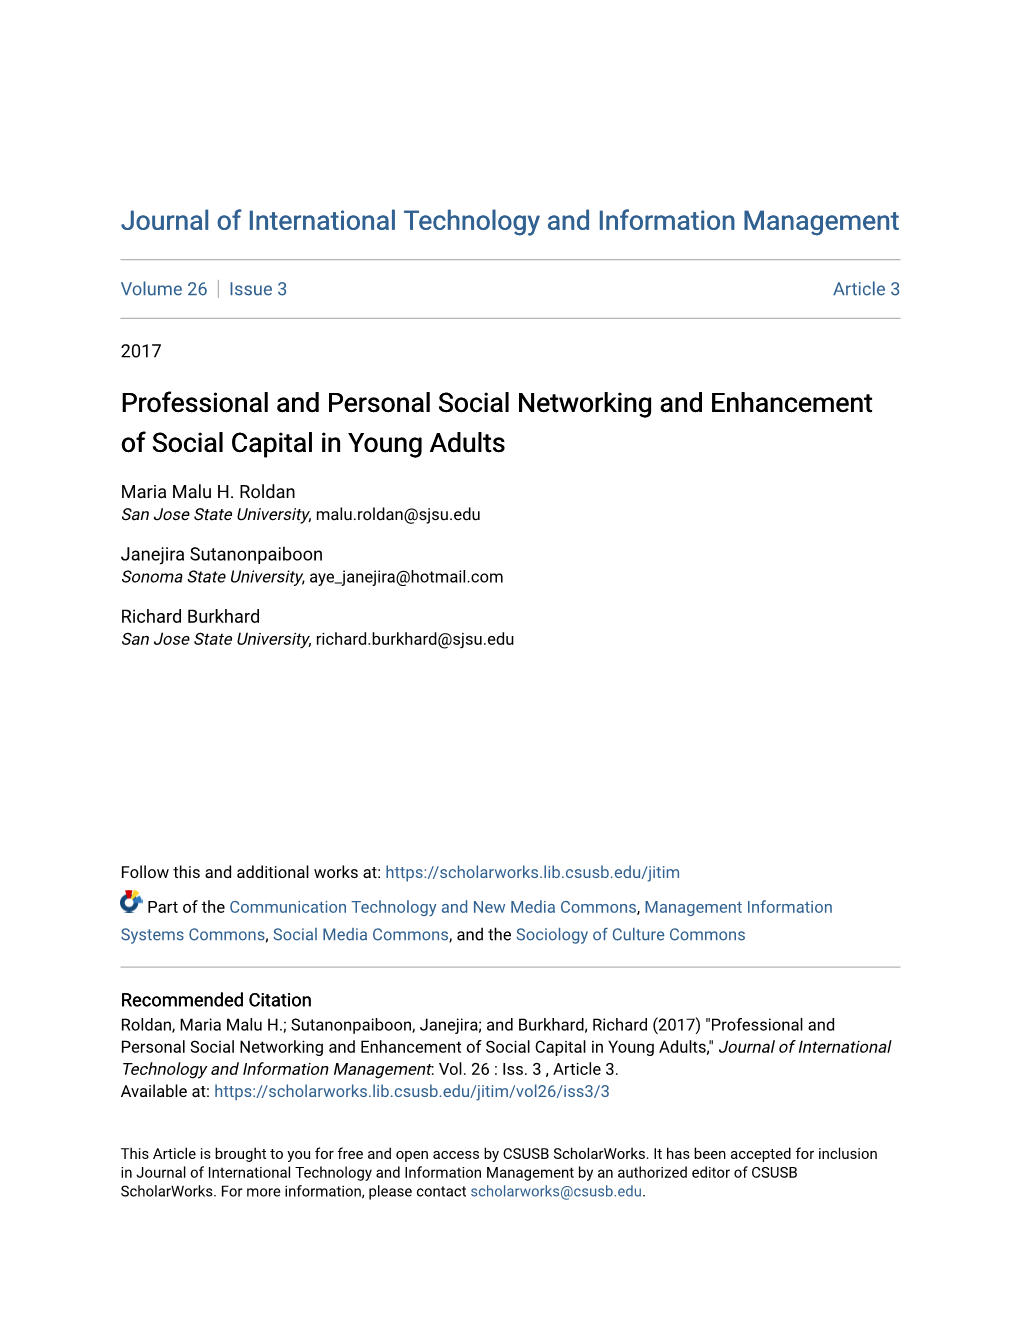 Professional and Personal Social Networking and Enhancement of Social Capital in Young Adults